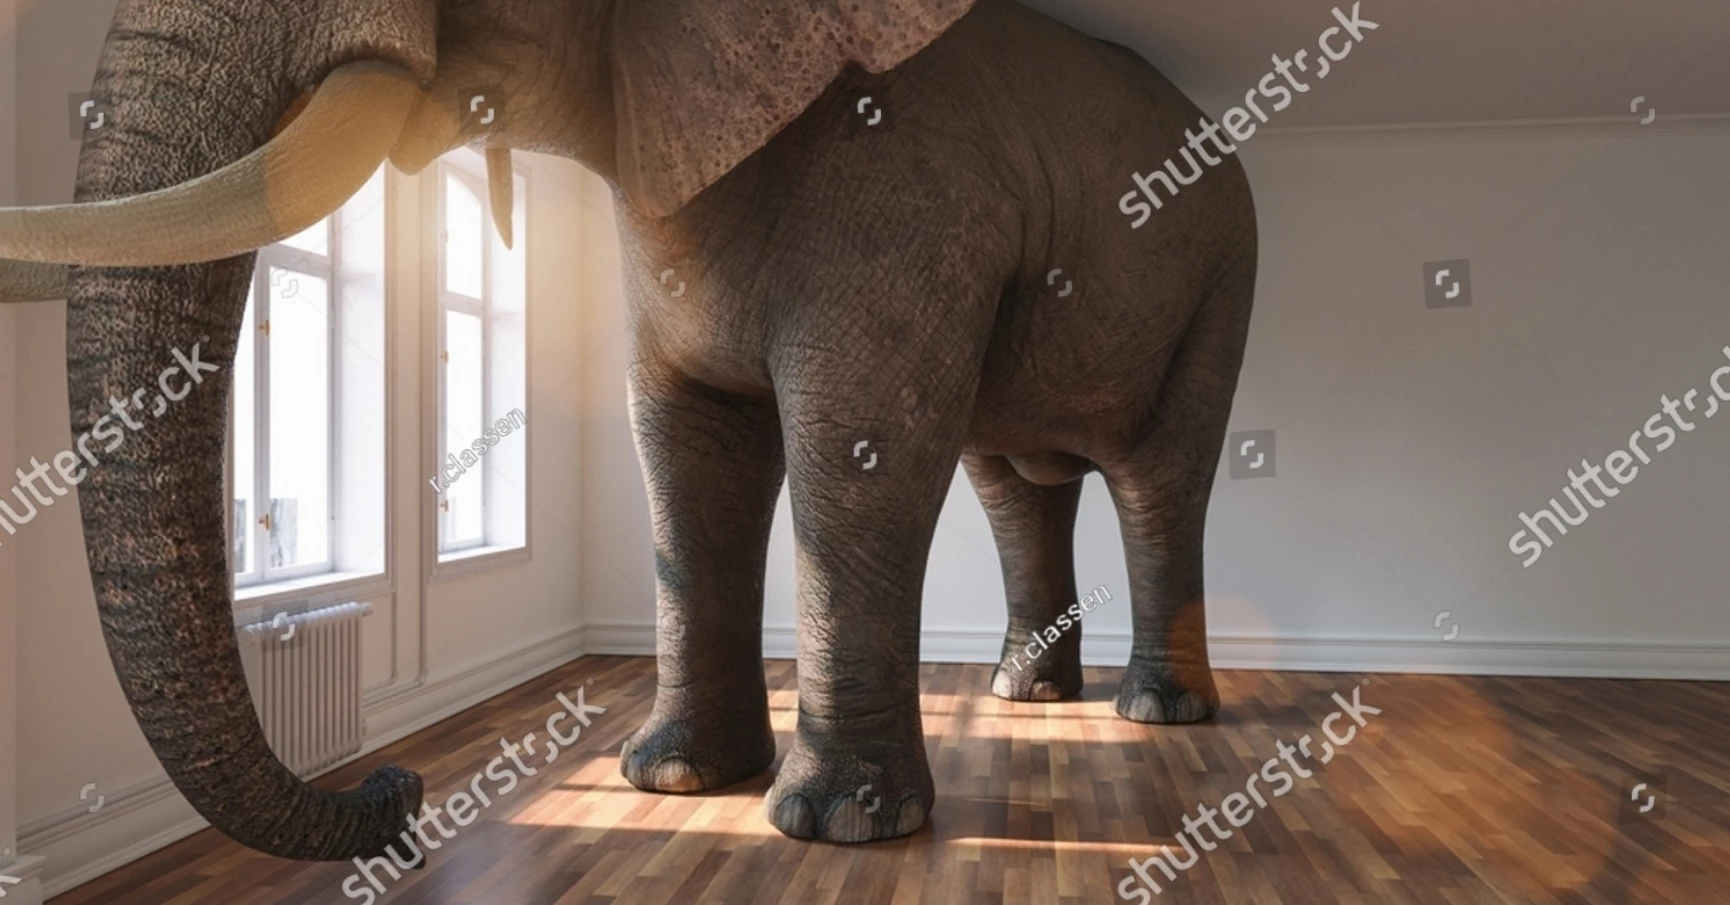 We Need To Address The Elephant In The Room